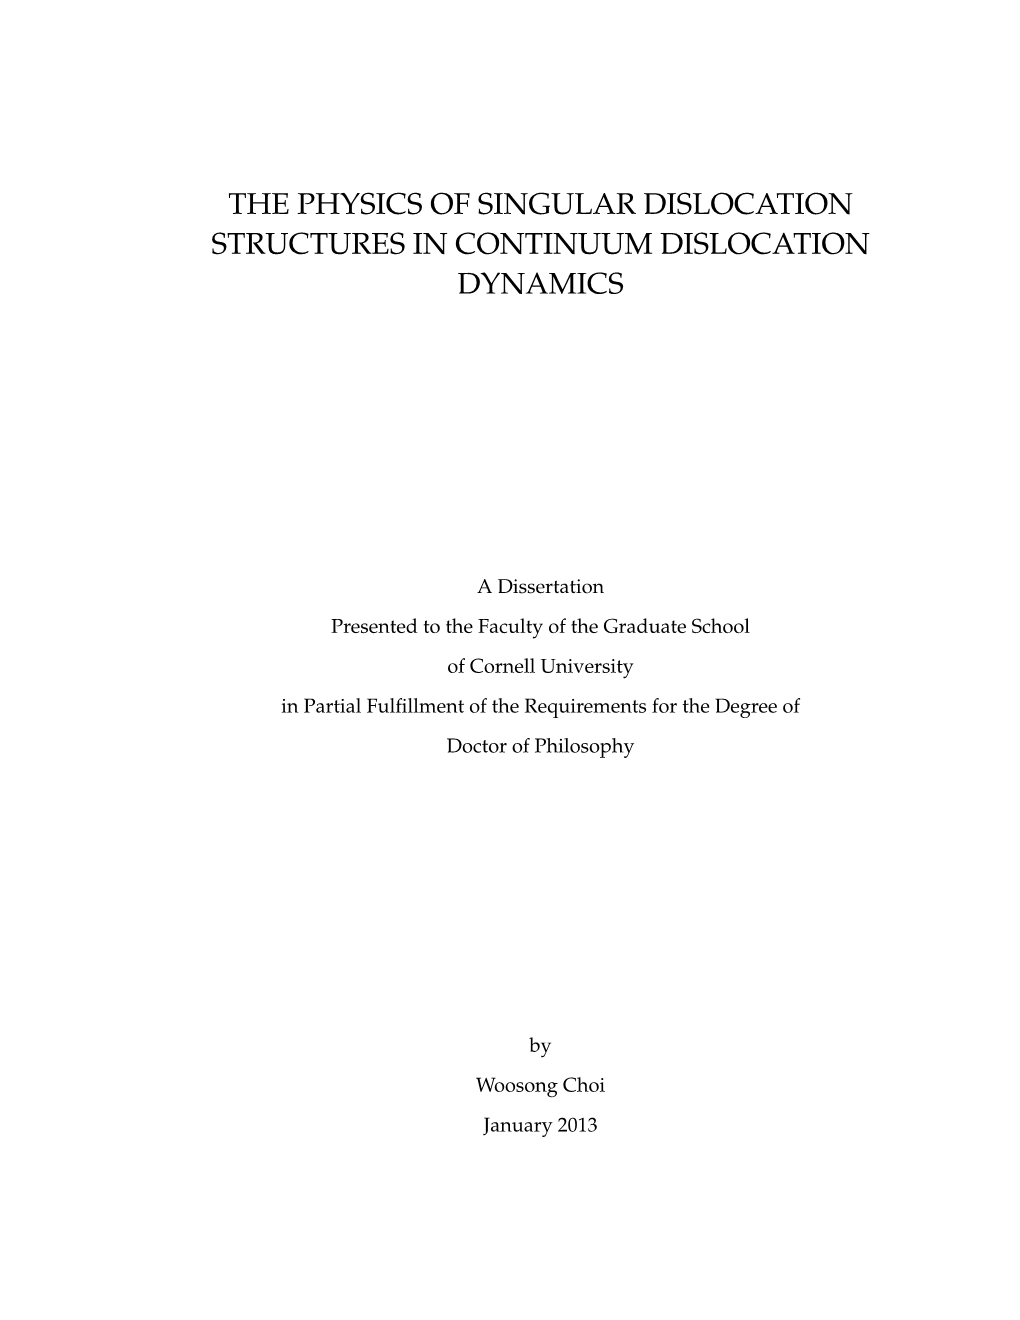 Physics of Singular Dislocation Structures in Continuum Dislocation Dynamics